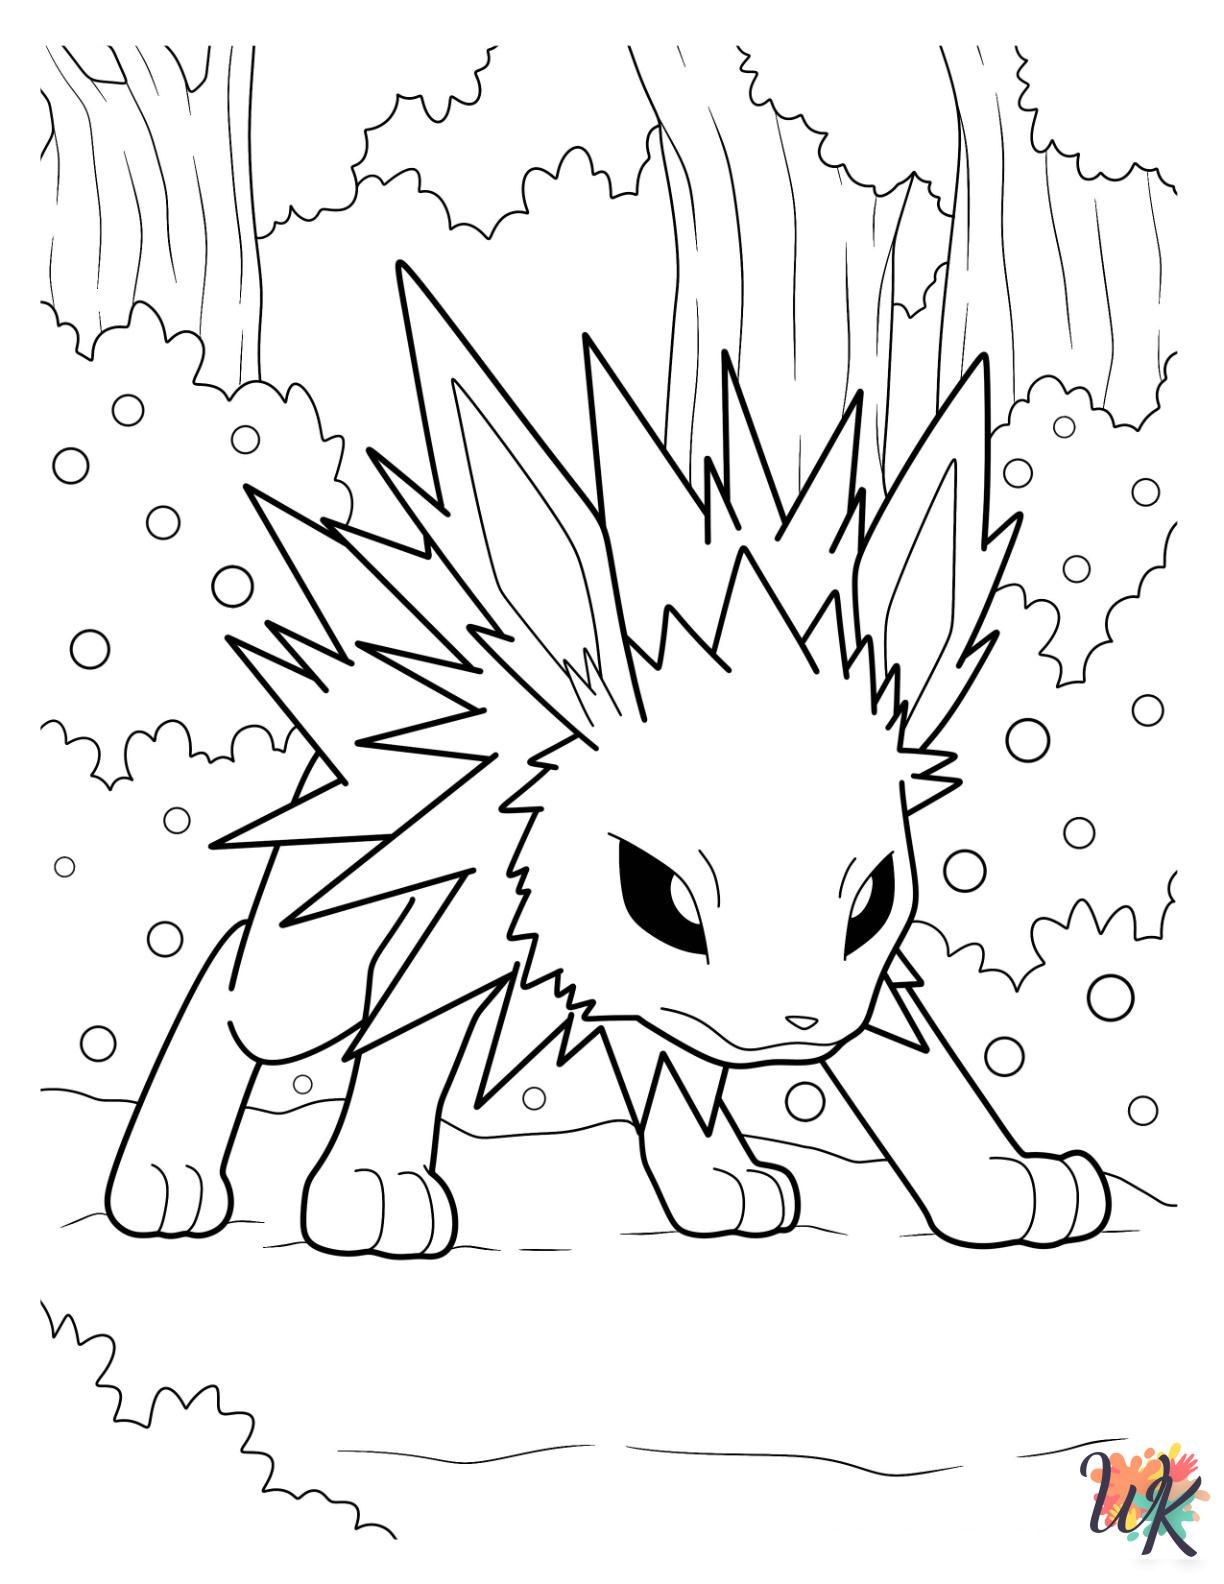 Jolteon adult coloring pages